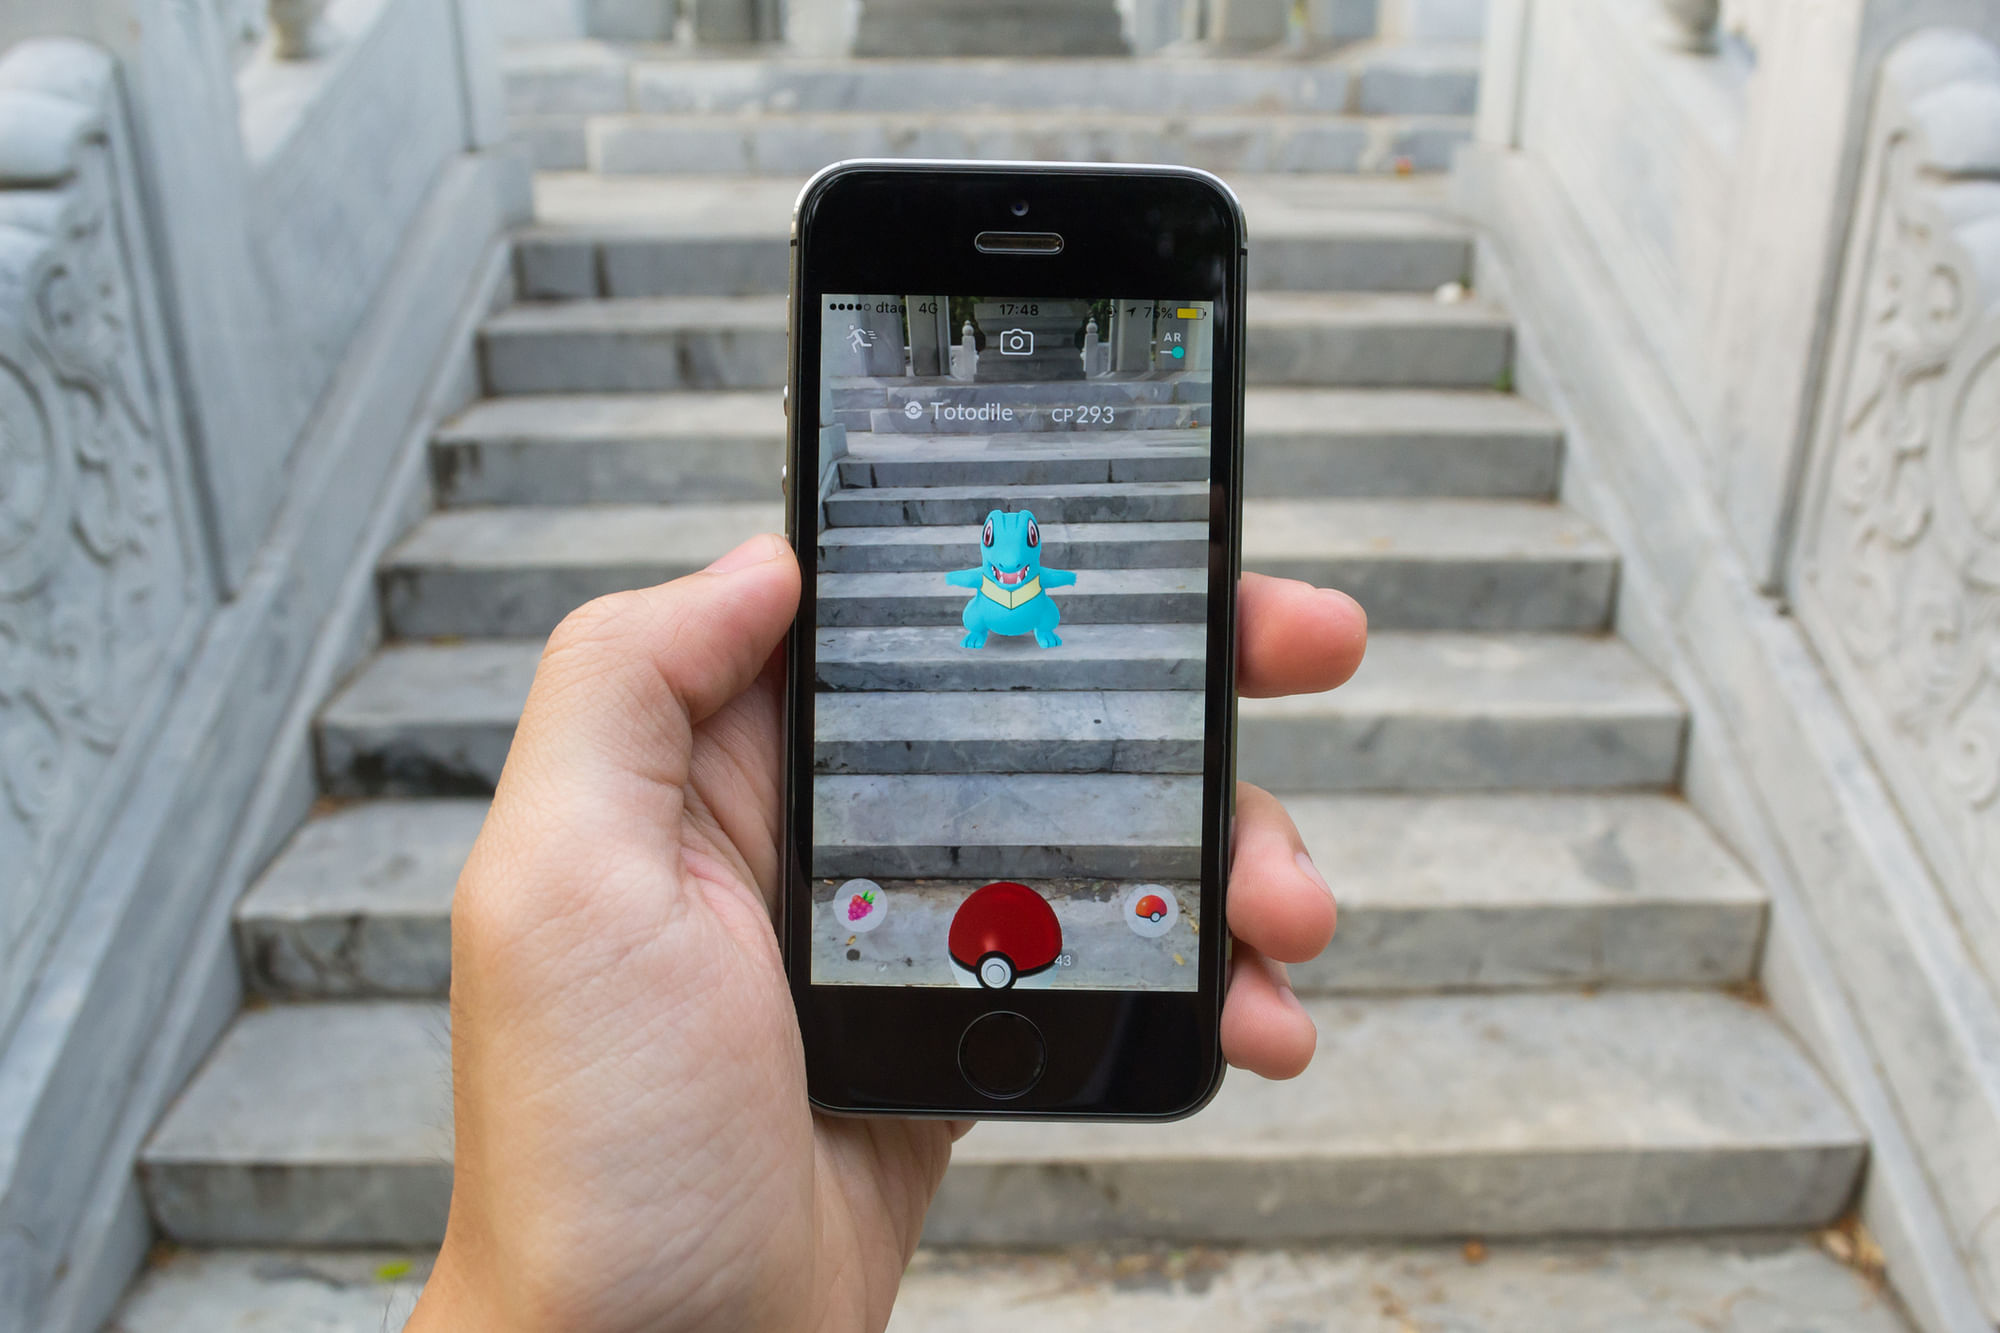 The popular augmented reality game Pokemon GO may boost physical activity in players over the age of 40, a study claims.